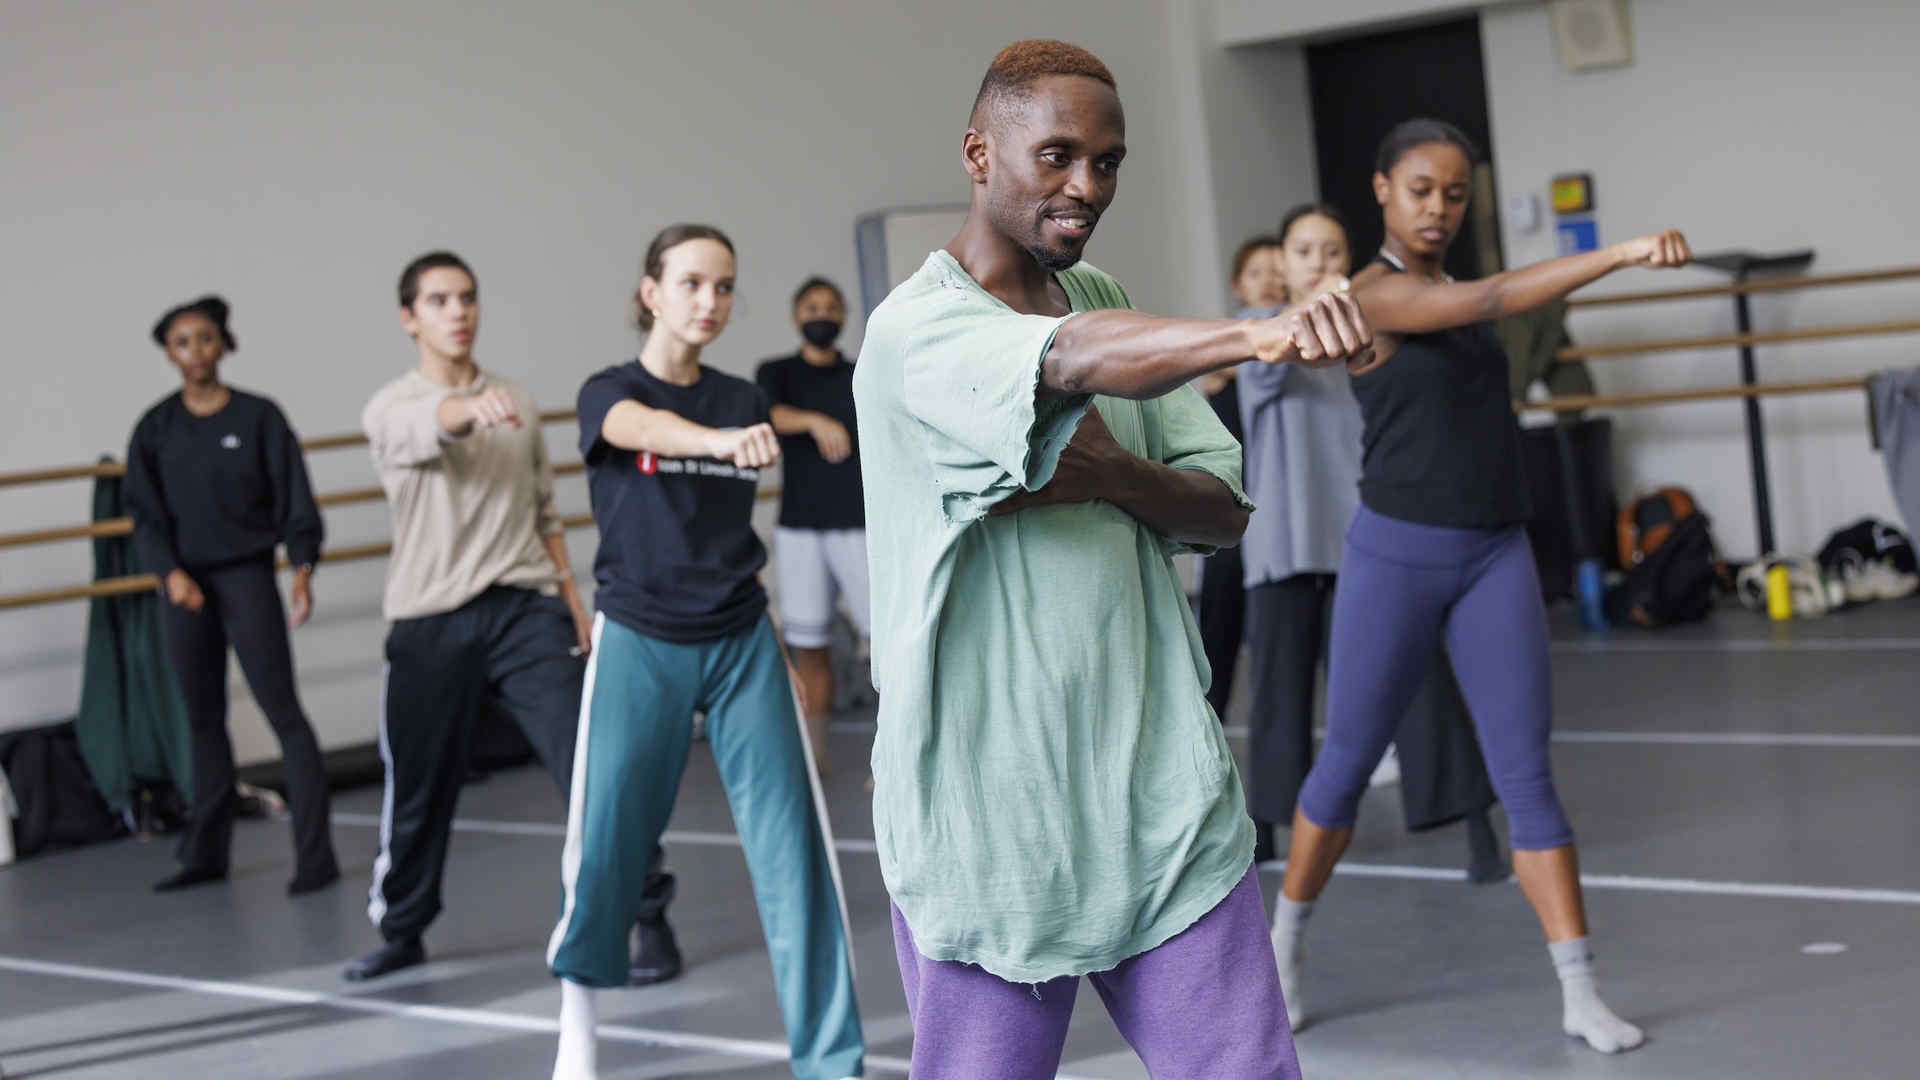 Jermaine Spivey leads a group of dancers through choreography in a dance studio. They make a gesture with the right arm extended.